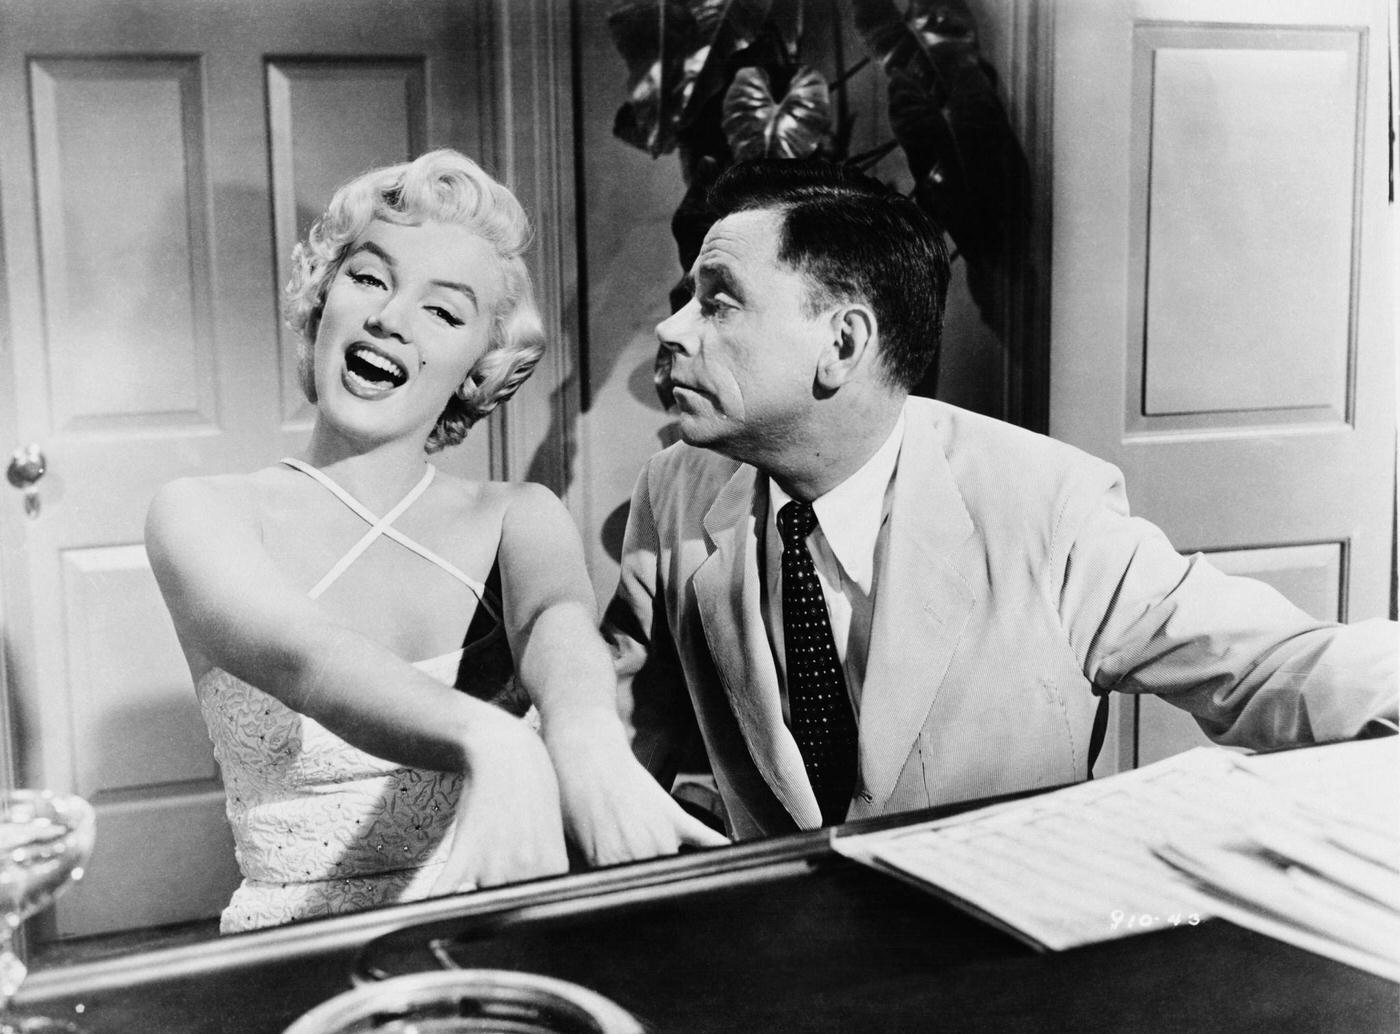 Marilyn Monroe and Tom Ewell on the set of 'The Seven Year Itch', 1955.